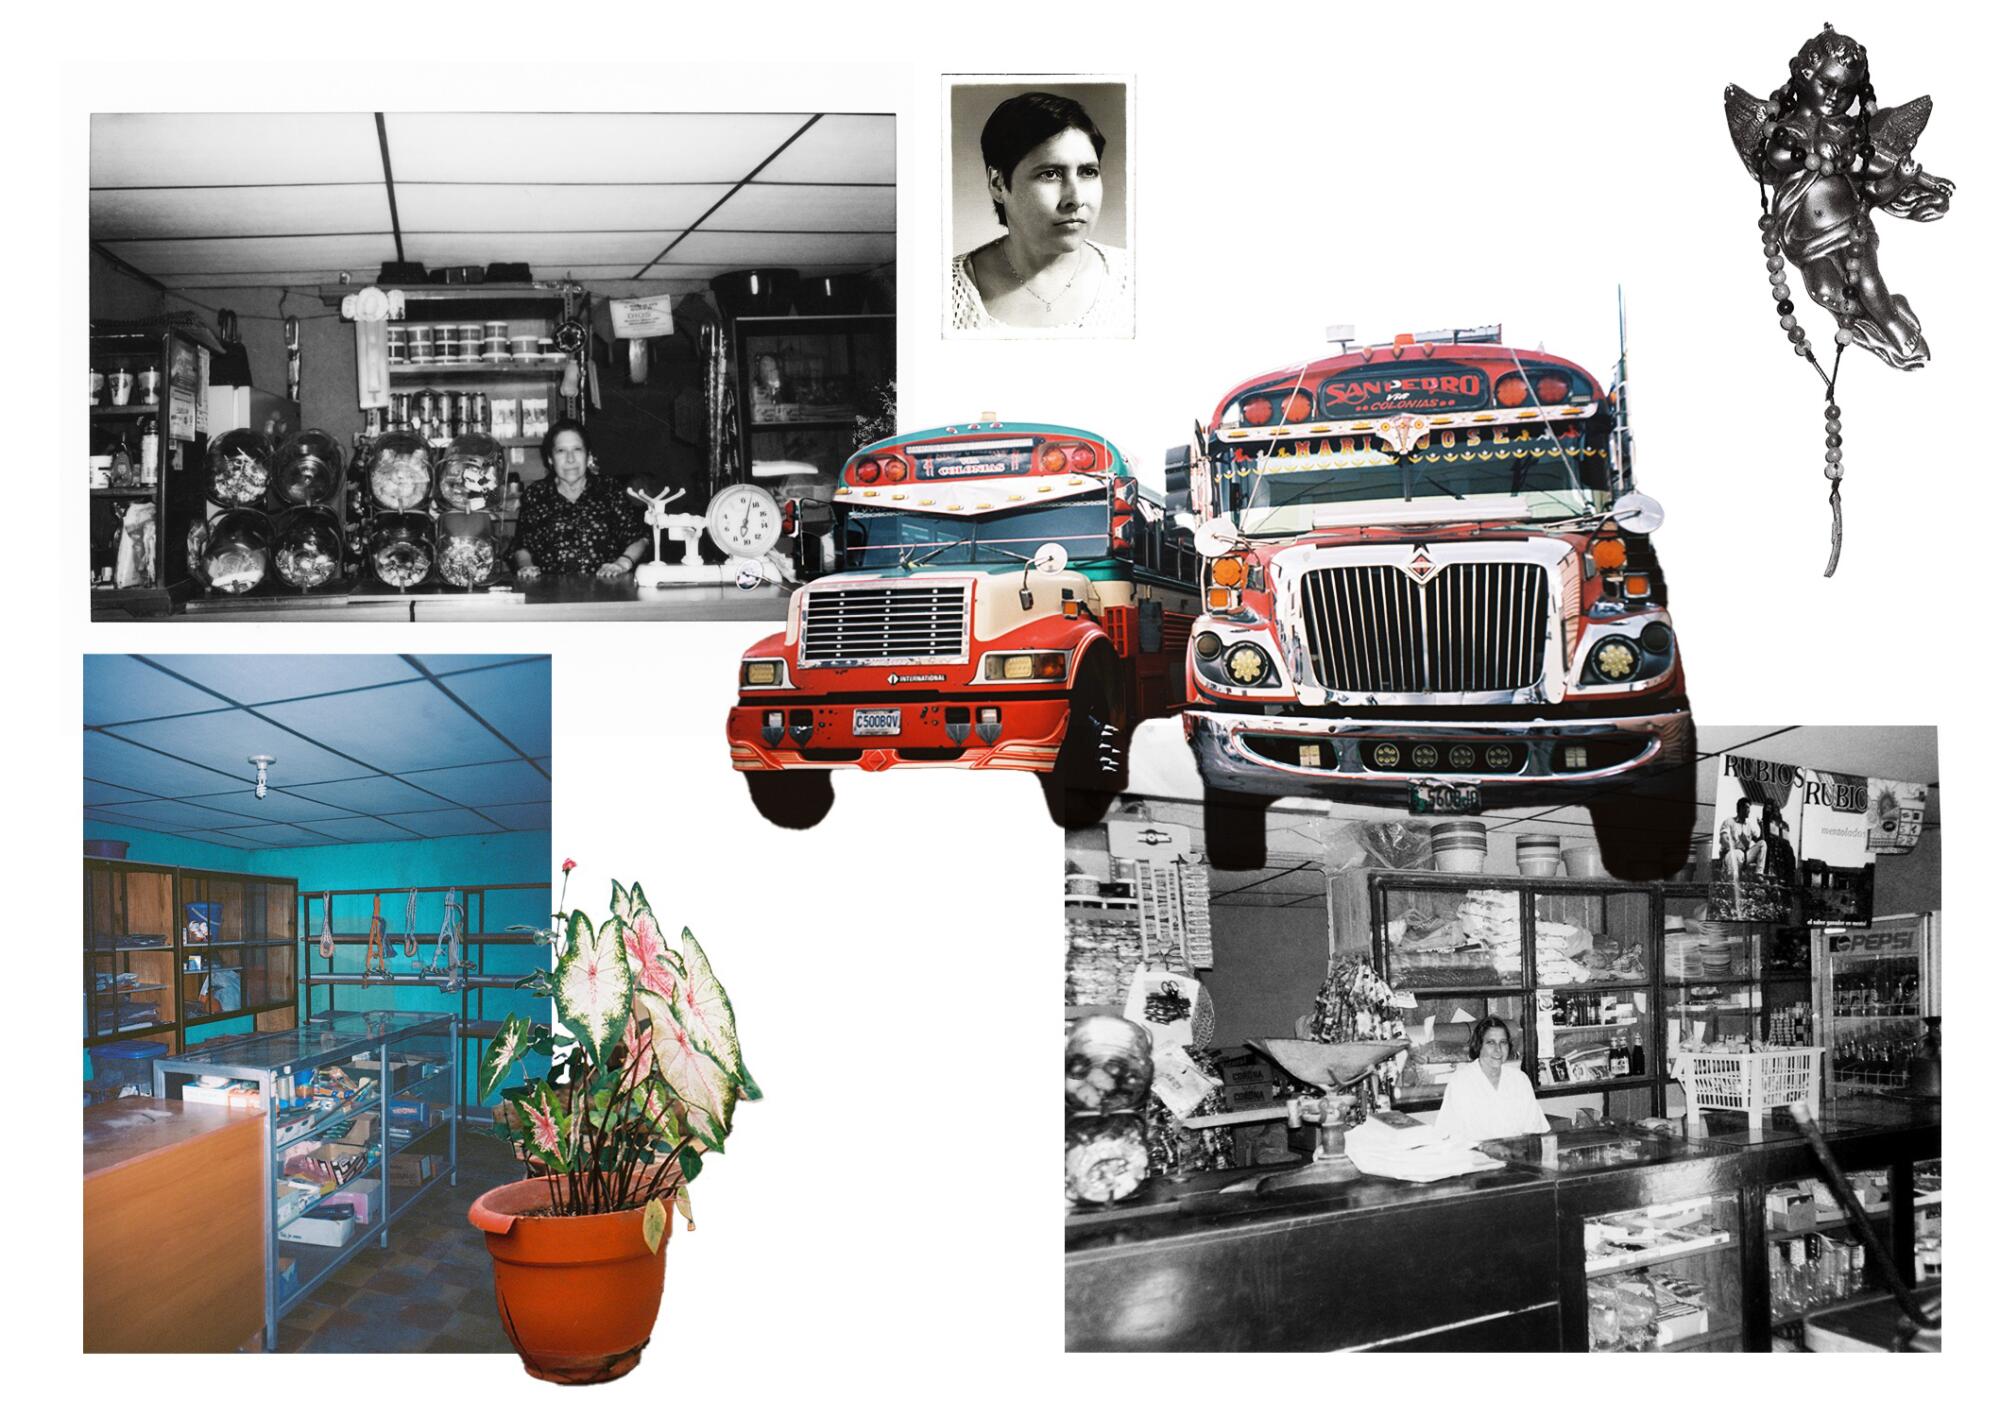 A photo collage features an old bus, headshots, a potted plant, a store interior and more